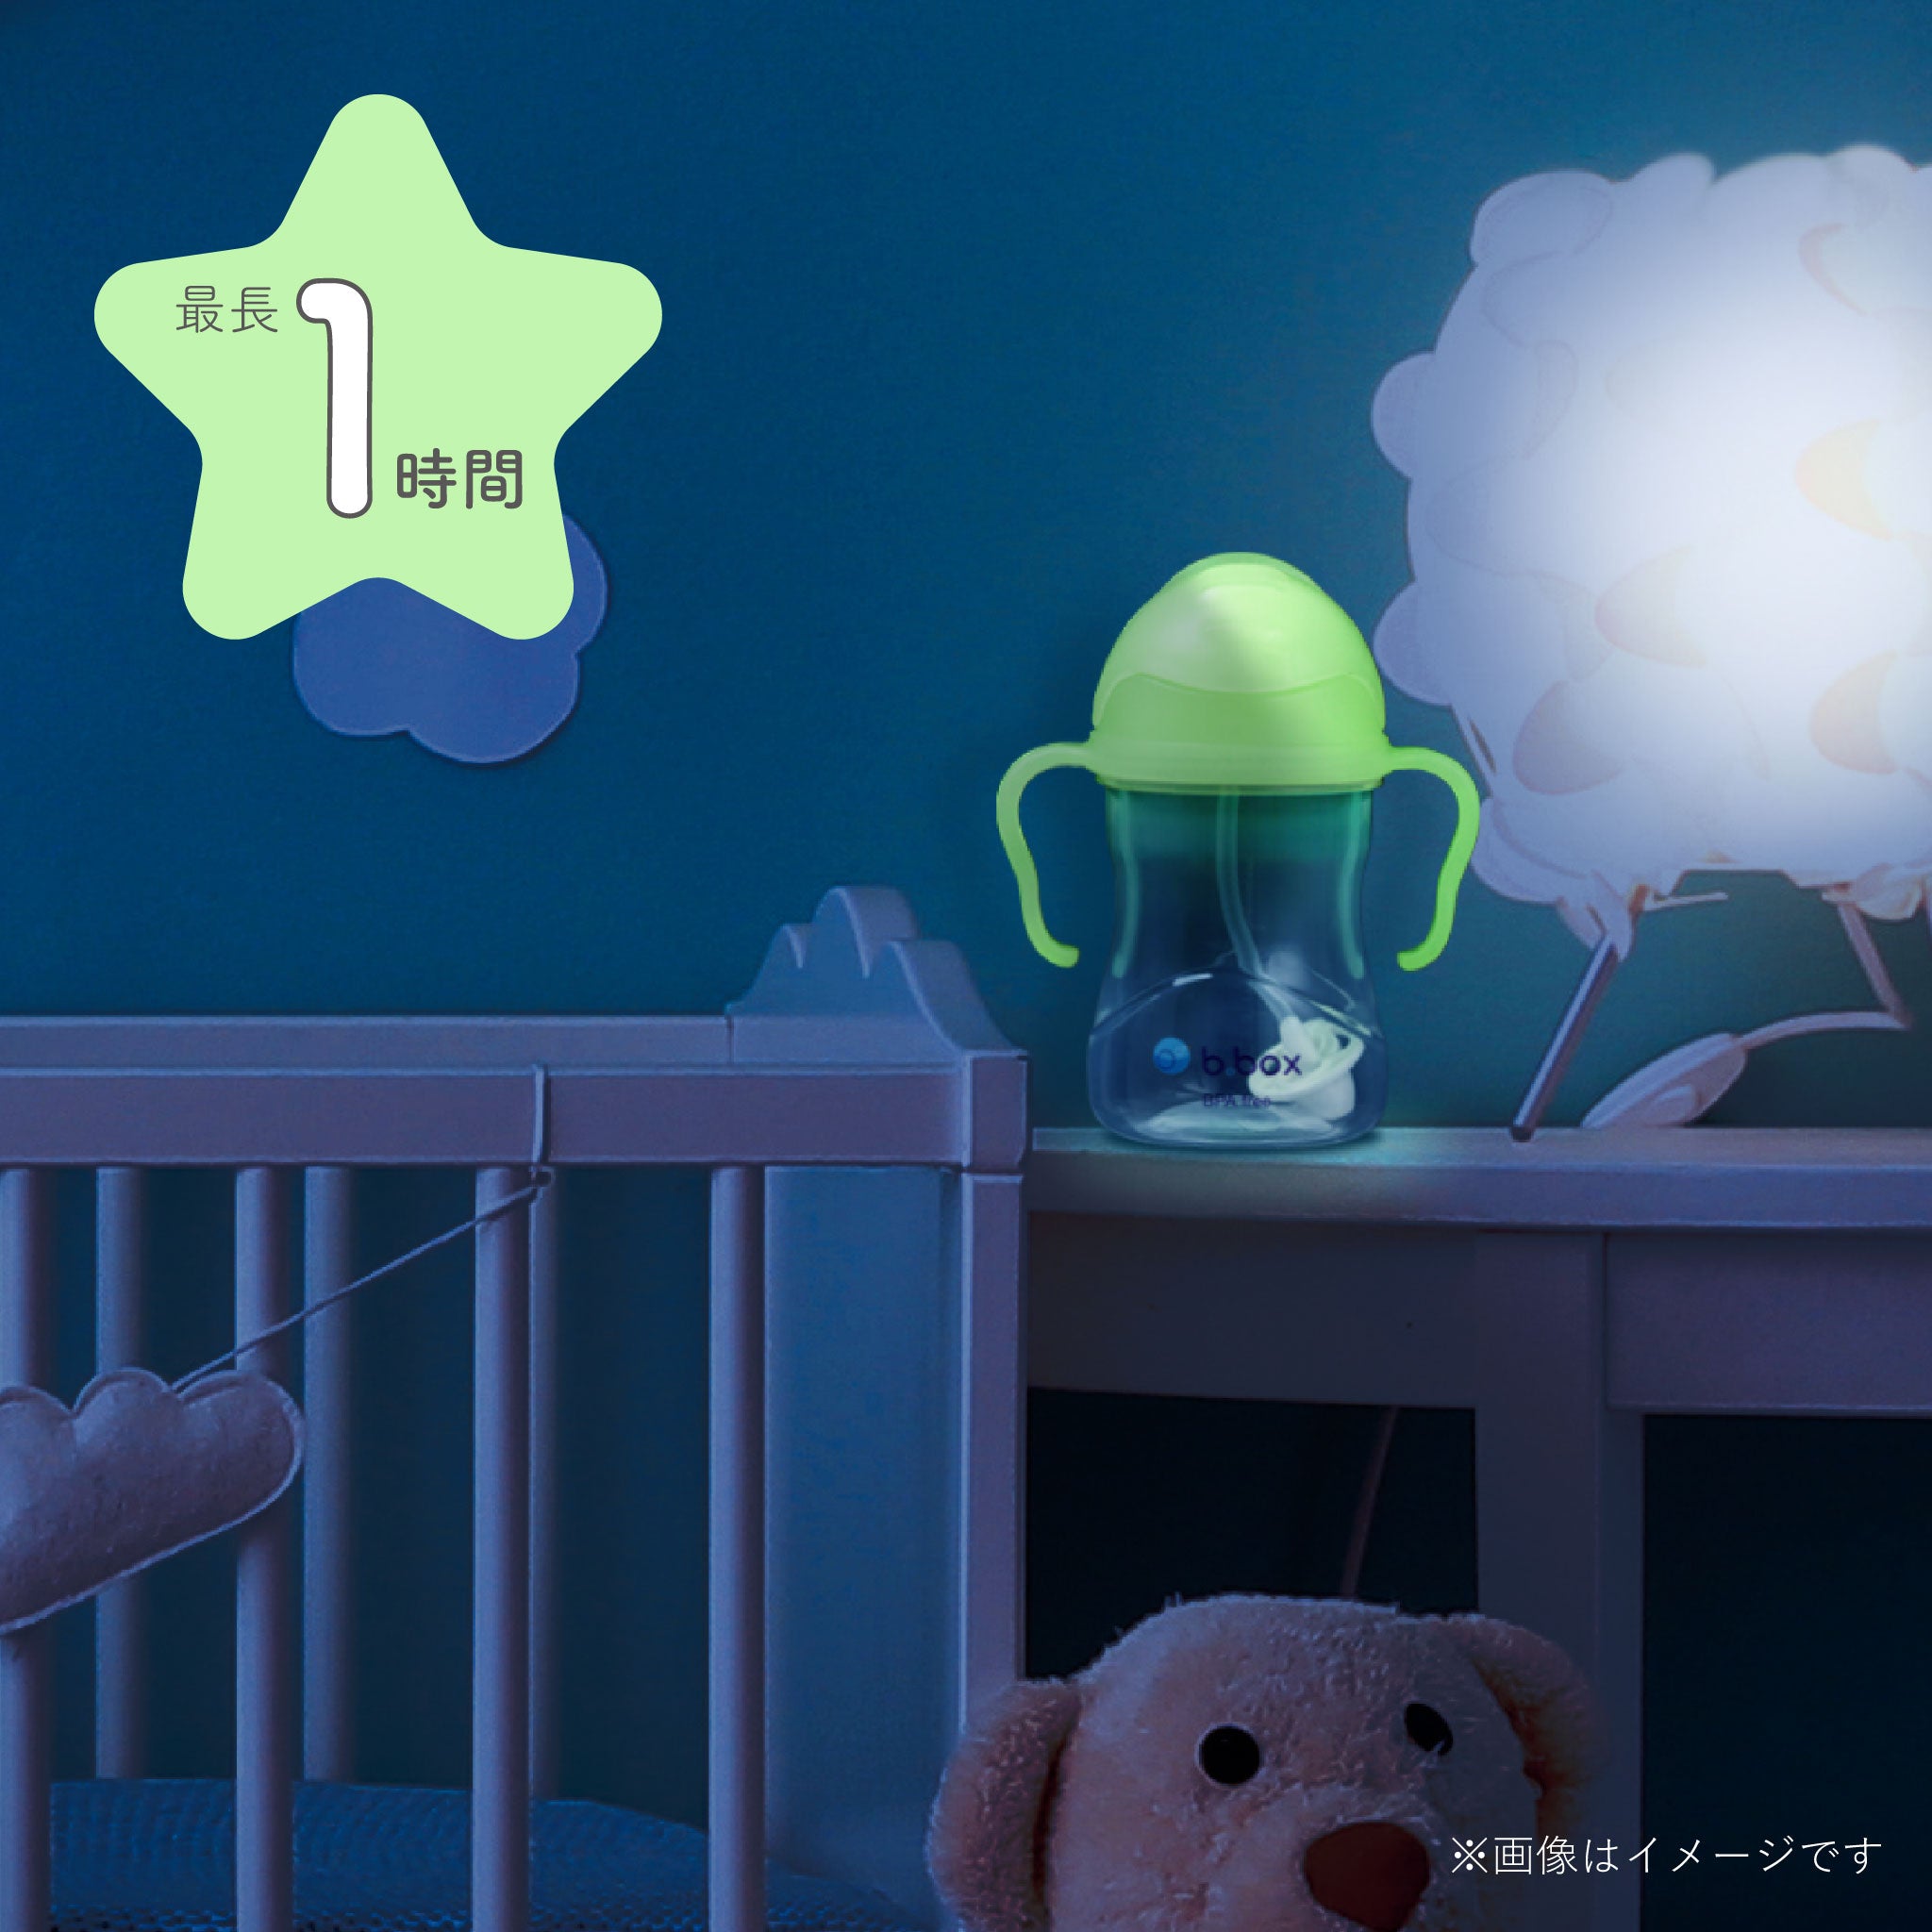 *b.box* Sippy cup シッピーカップ  - glow in the dark